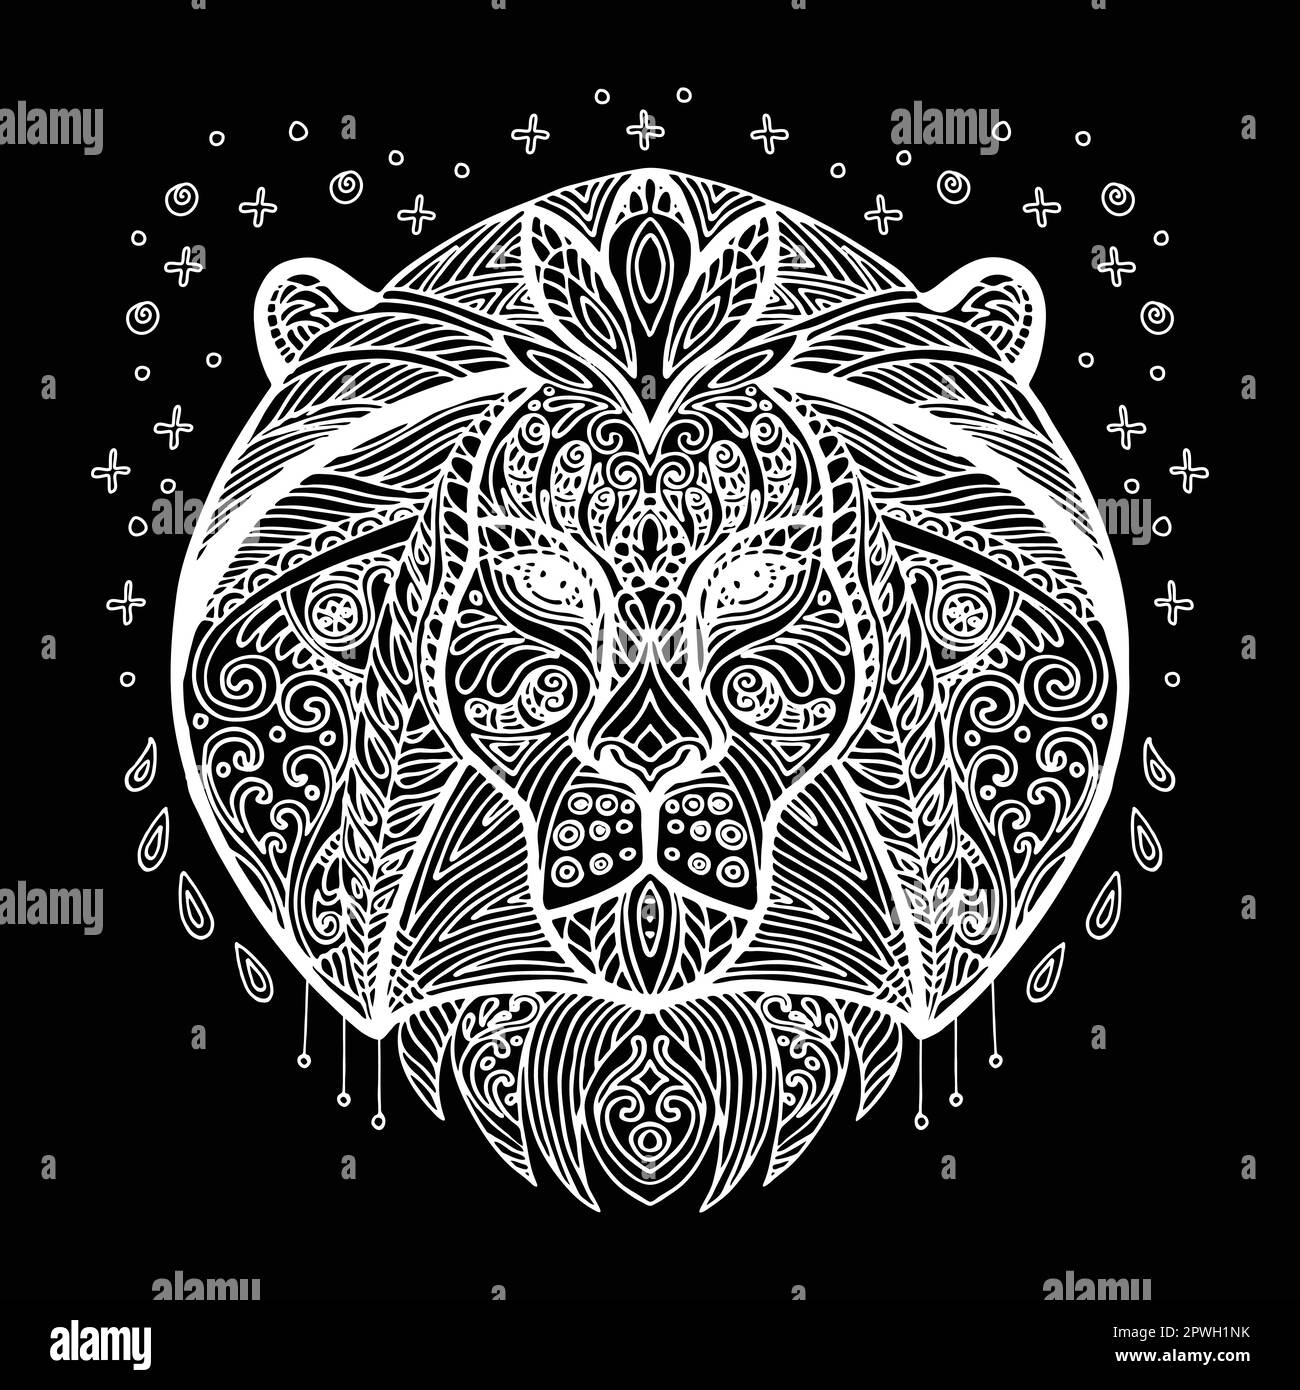 Lion Mandala Coloring Page Color Cat Animals Draw Drawing Paper Digital  File Download Adult Kids Education Art Project School Work 